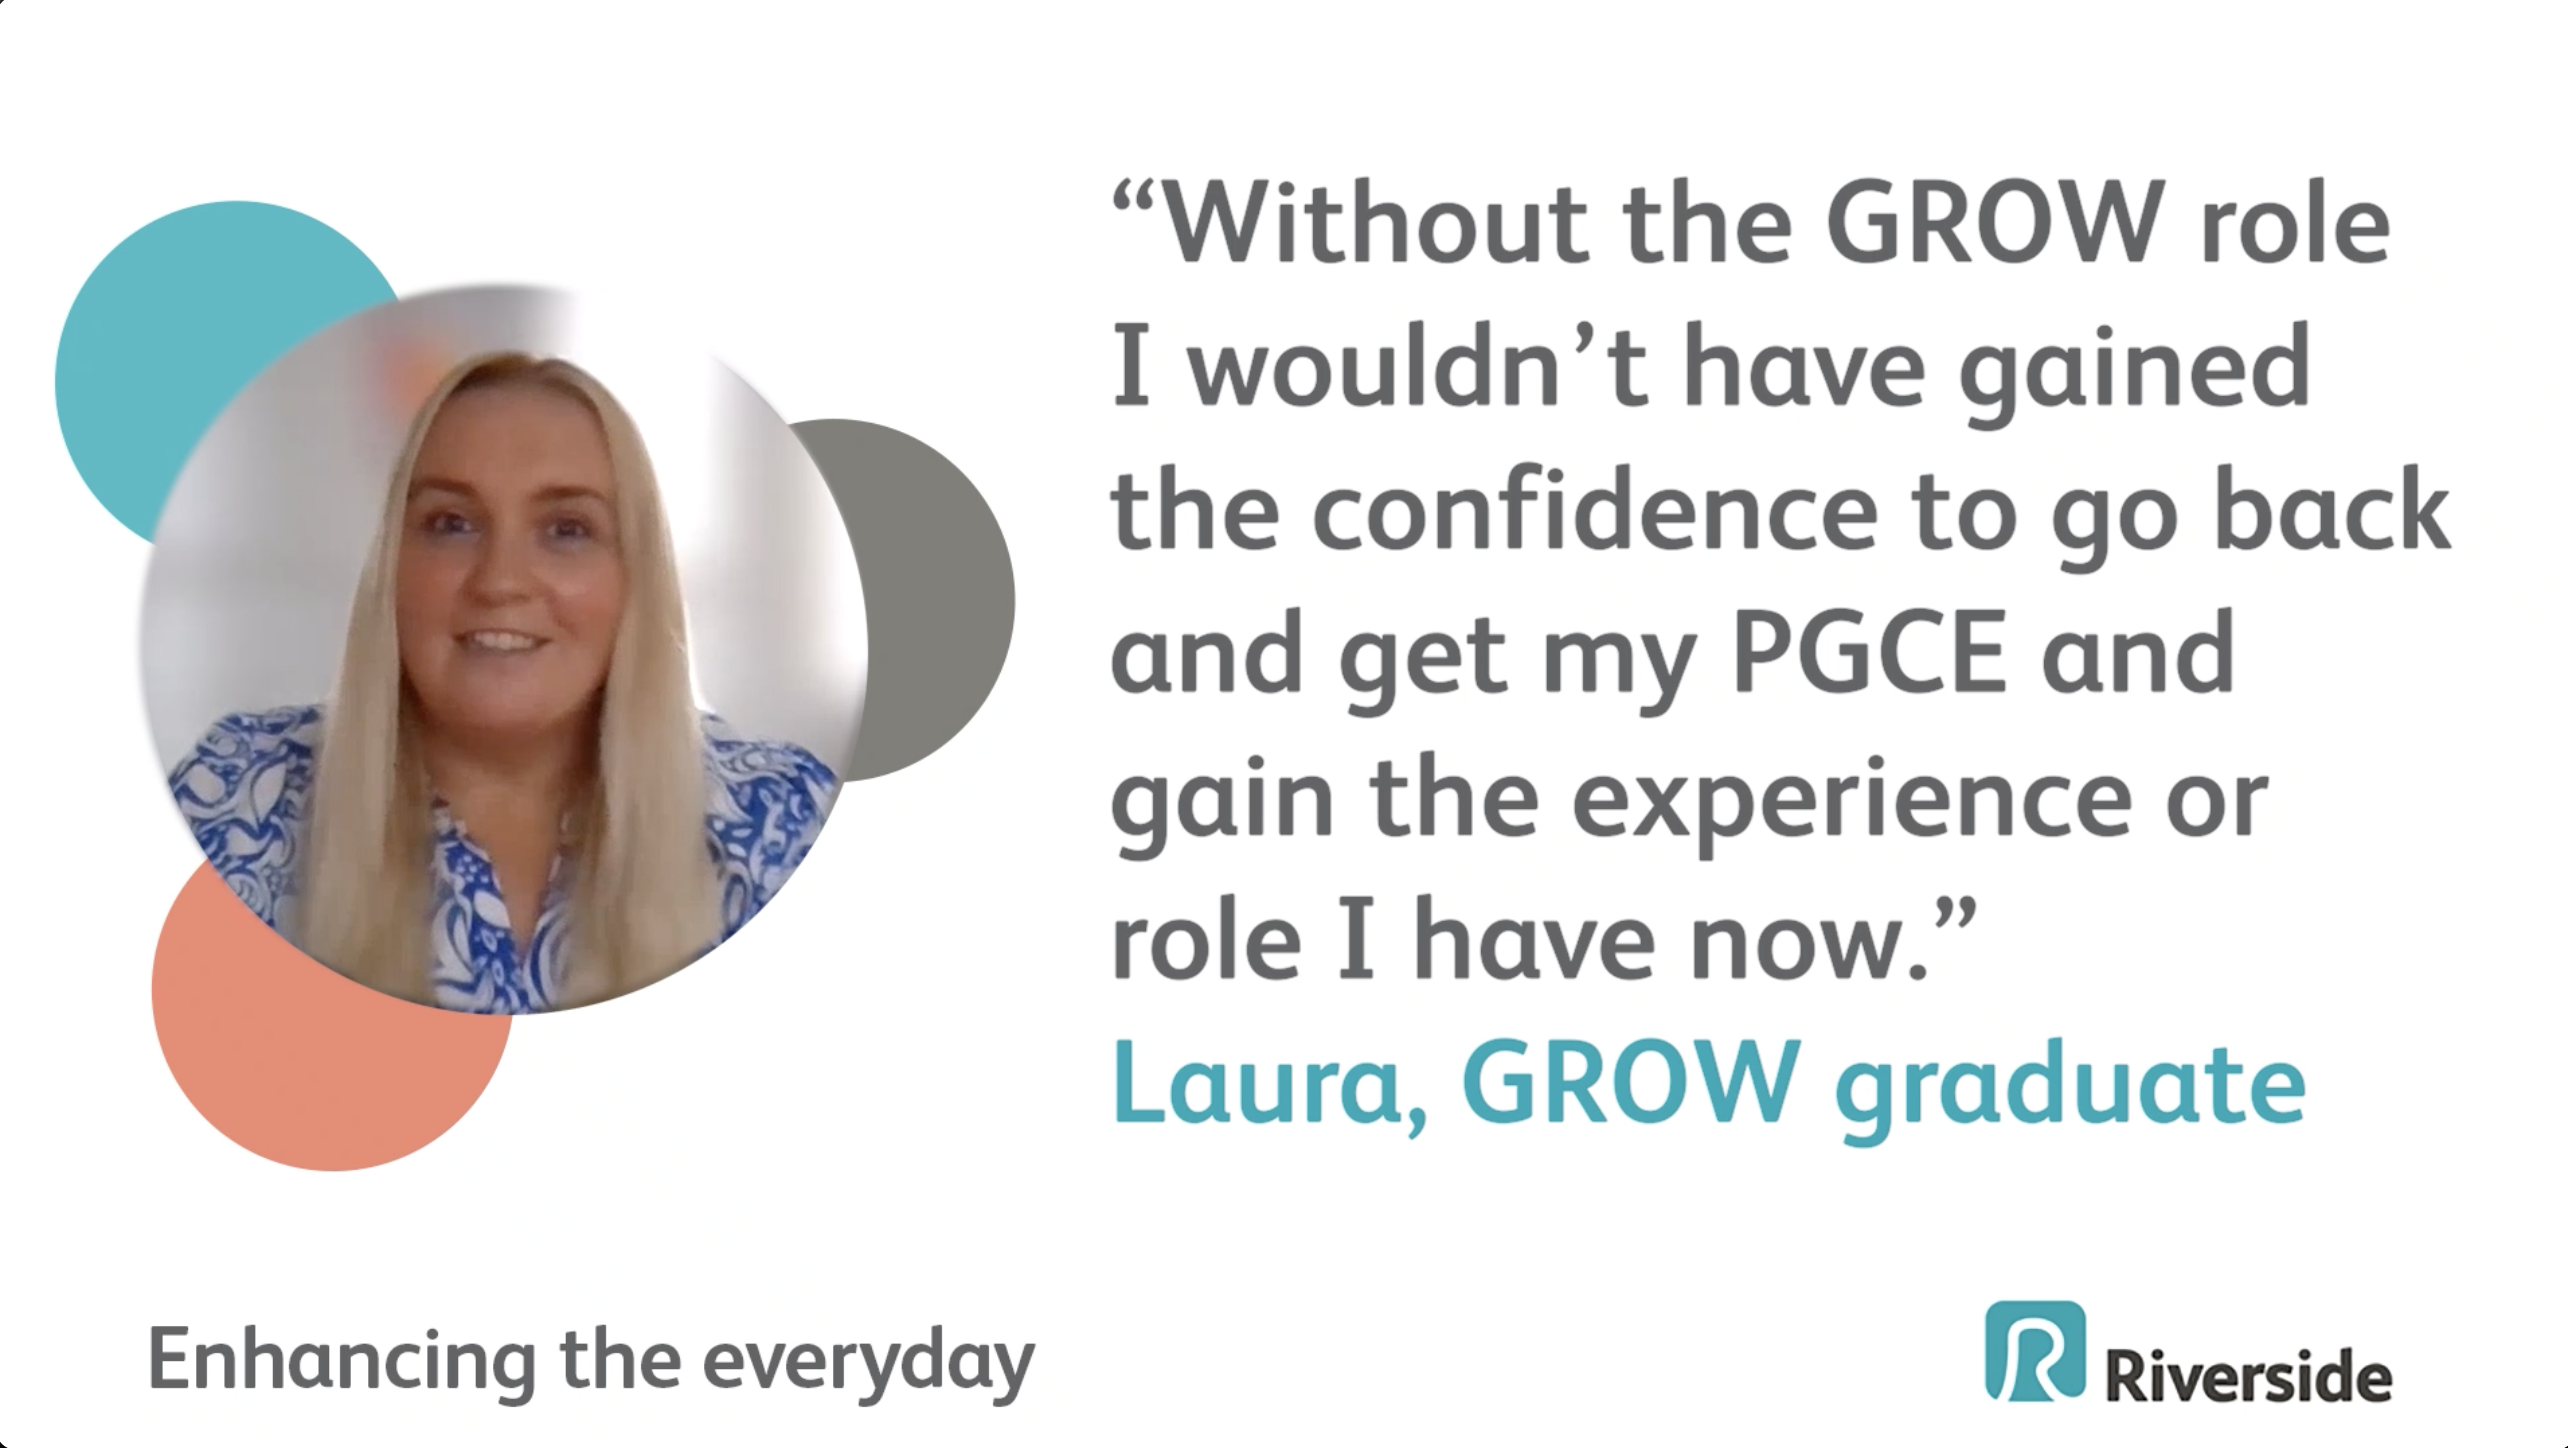 A picture of Laura with the words "Without the GROW role I wouldn't have gained the confiedence to go back and get my PGCE and gain the experience or role I have now." Laura, GROW graduate